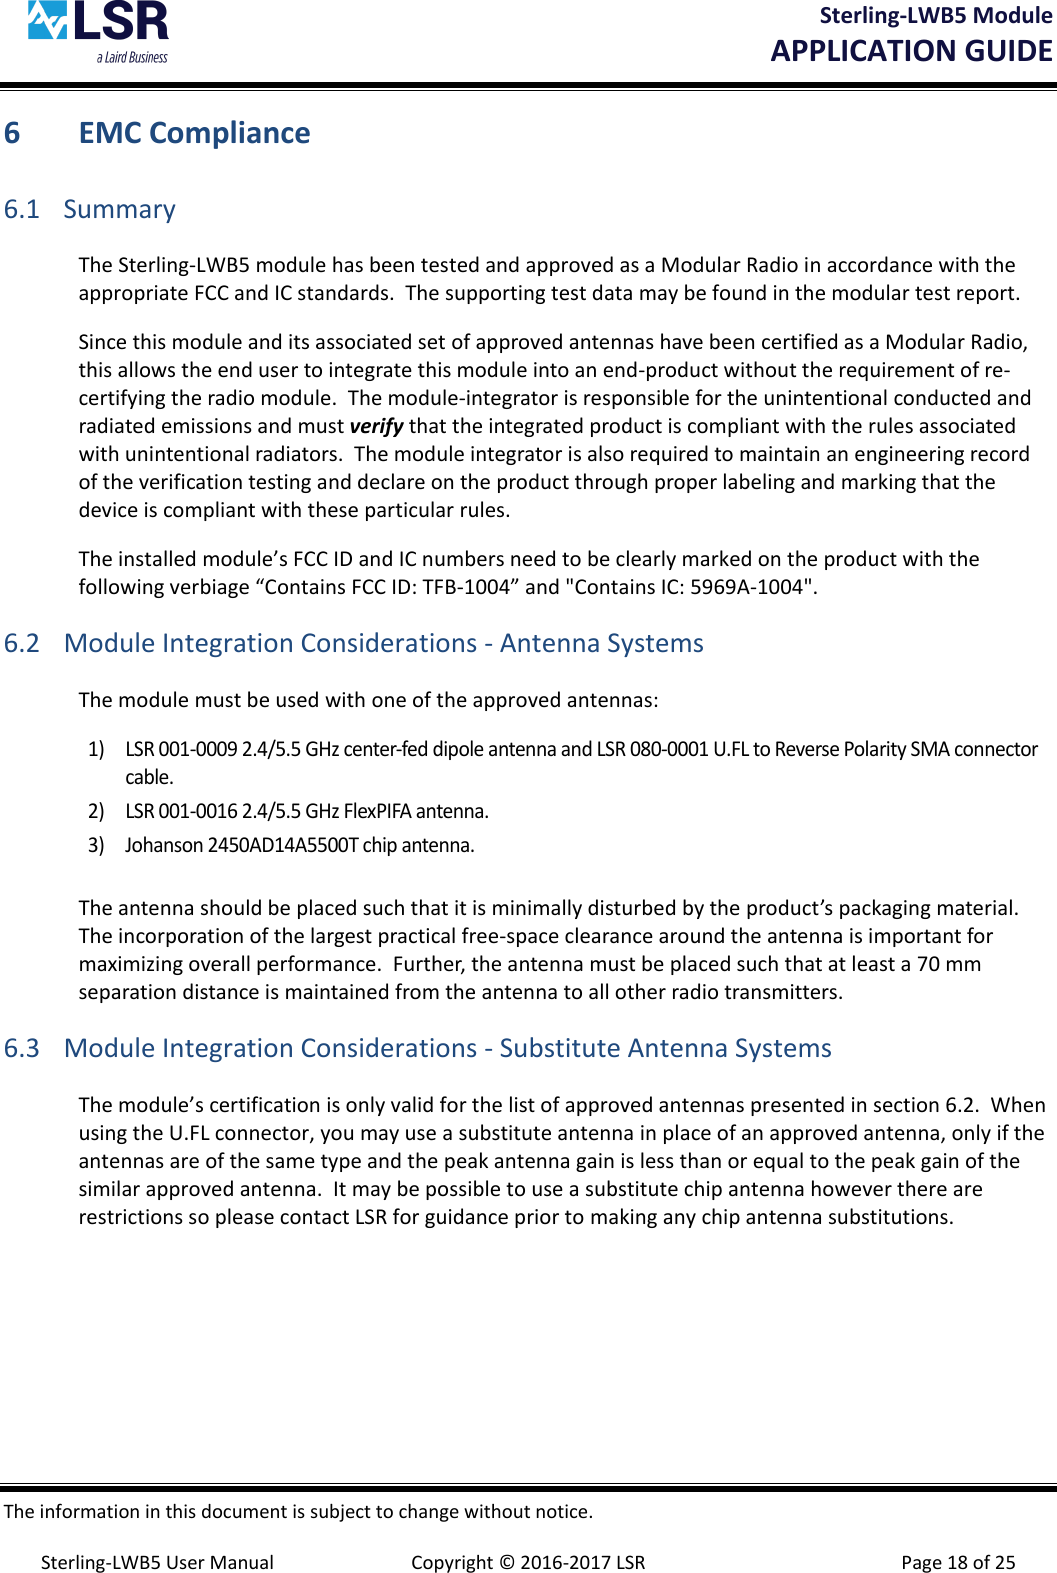 Sterling-LWB5 Module       APPLICATION GUIDE  The information in this document is subject to change without notice.  Sterling-LWB5 User Manual  Copyright © 2016-2017 LSR  Page 18 of 25 6 EMC Compliance 6.1 Summary The Sterling-LWB5 module has been tested and approved as a Modular Radio in accordance with the appropriate FCC and IC standards.  The supporting test data may be found in the modular test report. Since this module and its associated set of approved antennas have been certified as a Modular Radio, this allows the end user to integrate this module into an end-product without the requirement of re-certifying the radio module.  The module-integrator is responsible for the unintentional conducted and radiated emissions and must verify that the integrated product is compliant with the rules associated with unintentional radiators.  The module integrator is also required to maintain an engineering record of the verification testing and declare on the product through proper labeling and marking that the device is compliant with these particular rules.   The installed module’s FCC ID and IC numbers need to be clearly marked on the product with the following verbiage “Contains FCC ID: TFB-1004” and &quot;Contains IC: 5969A-1004&quot;. 6.2 Module Integration Considerations - Antenna Systems The module must be used with one of the approved antennas:  1) LSR 001-0009 2.4/5.5 GHz center-fed dipole antenna and LSR 080-0001 U.FL to Reverse Polarity SMA connector cable. 2) LSR 001-0016 2.4/5.5 GHz FlexPIFA antenna. 3) Johanson 2450AD14A5500T chip antenna.  The antenna should be placed such that it is minimally disturbed by the product’s packaging material.  The incorporation of the largest practical free-space clearance around the antenna is important for maximizing overall performance.  Further, the antenna must be placed such that at least a 70 mm separation distance is maintained from the antenna to all other radio transmitters.  6.3 Module Integration Considerations - Substitute Antenna Systems The module’s certification is only valid for the list of approved antennas presented in section 6.2.  When using the U.FL connector, you may use a substitute antenna in place of an approved antenna, only if the antennas are of the same type and the peak antenna gain is less than or equal to the peak gain of the similar approved antenna.  It may be possible to use a substitute chip antenna however there are restrictions so please contact LSR for guidance prior to making any chip antenna substitutions.   